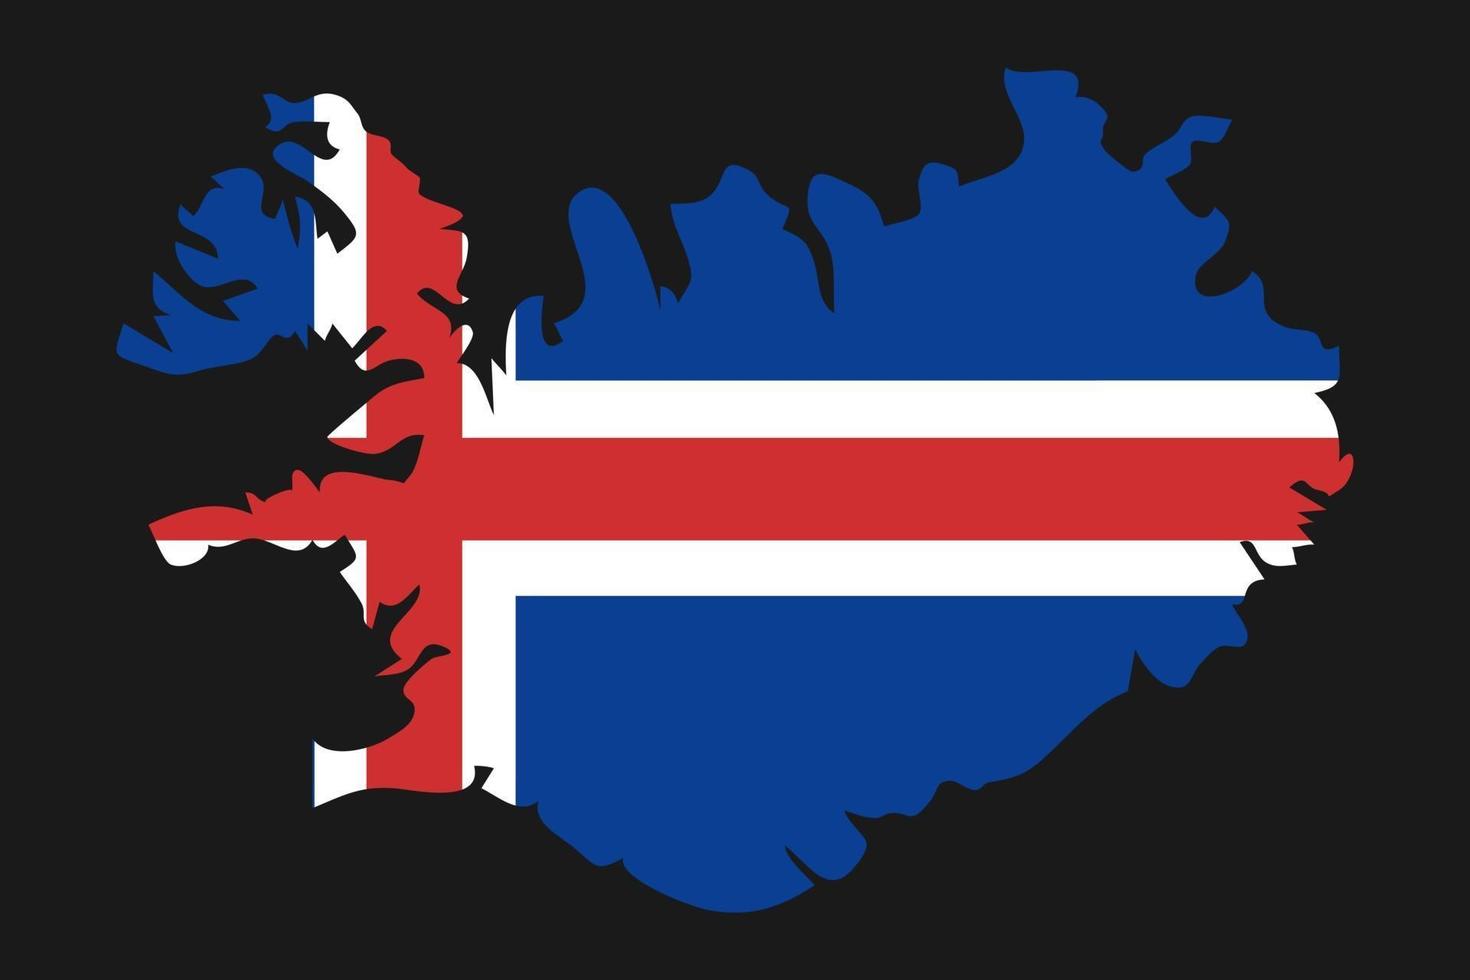 Iceland map silhouette with flag on black background vector